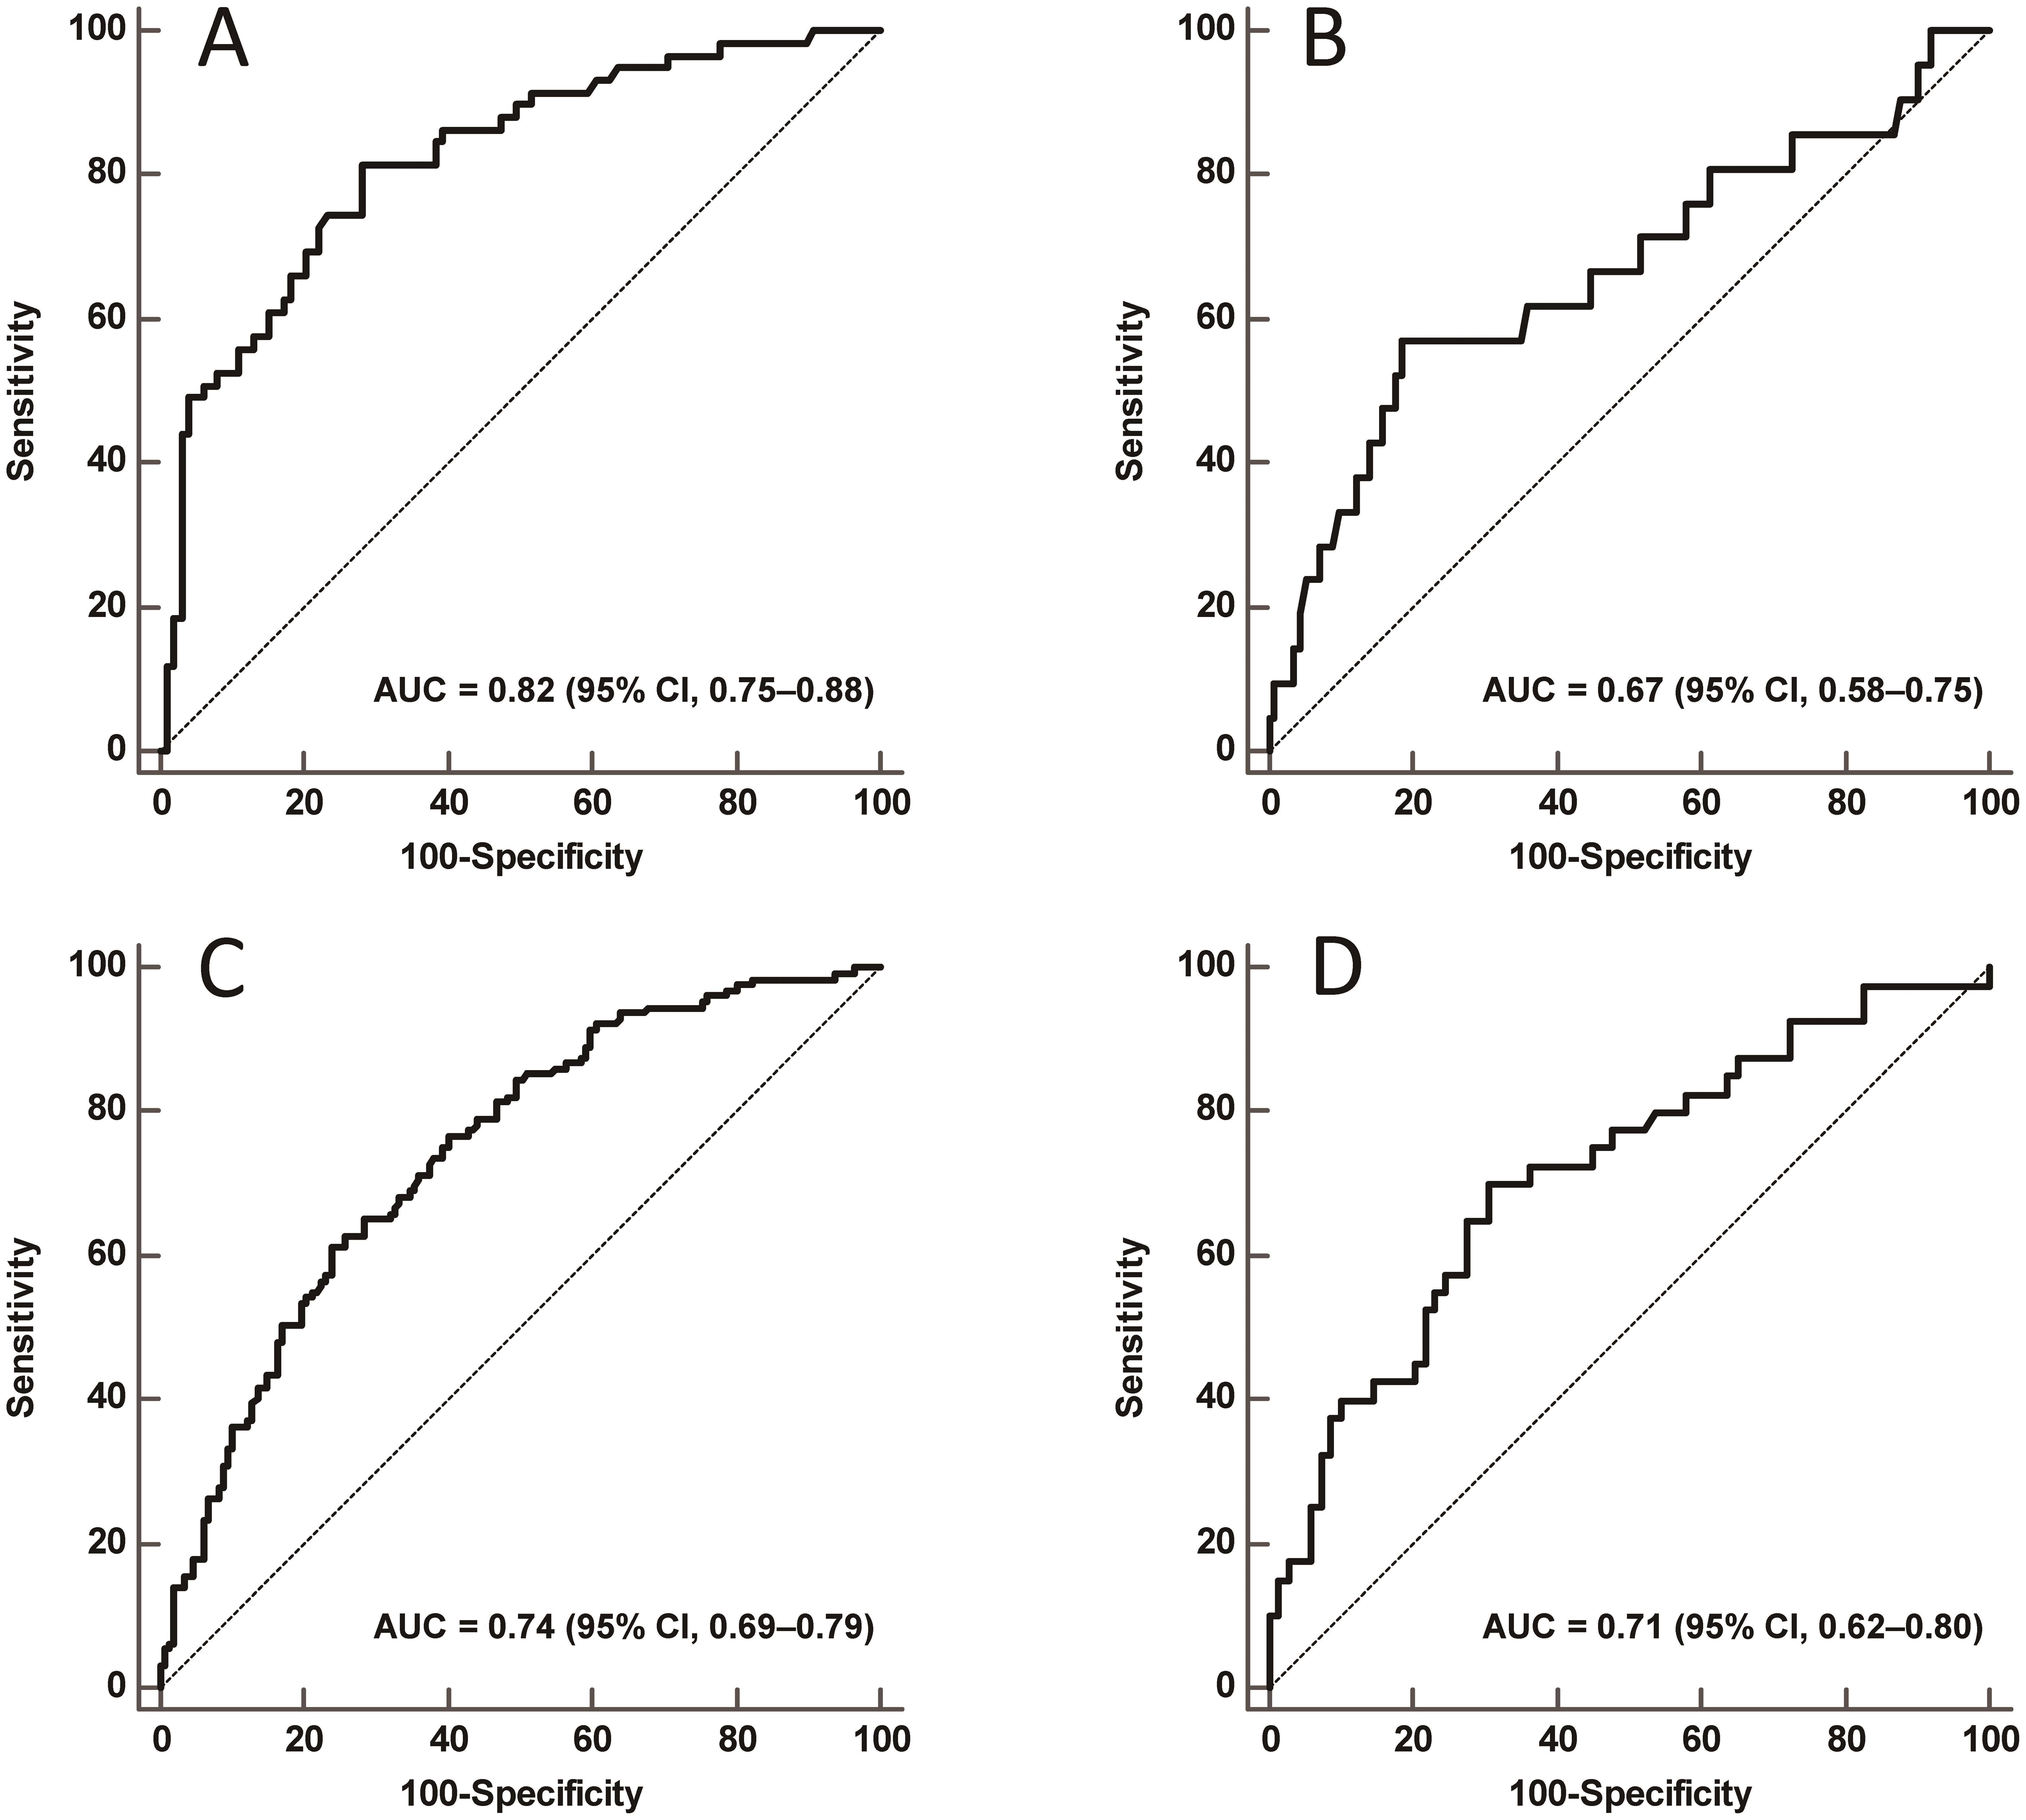 Receiver operating characteristic curves for visceral fat area to identify (A) lean nonalcoholic fatty liver disease (NAFLD) in men, (B) in lean women, (C) in overweight/obese men, and (D) overweight/obese in women.